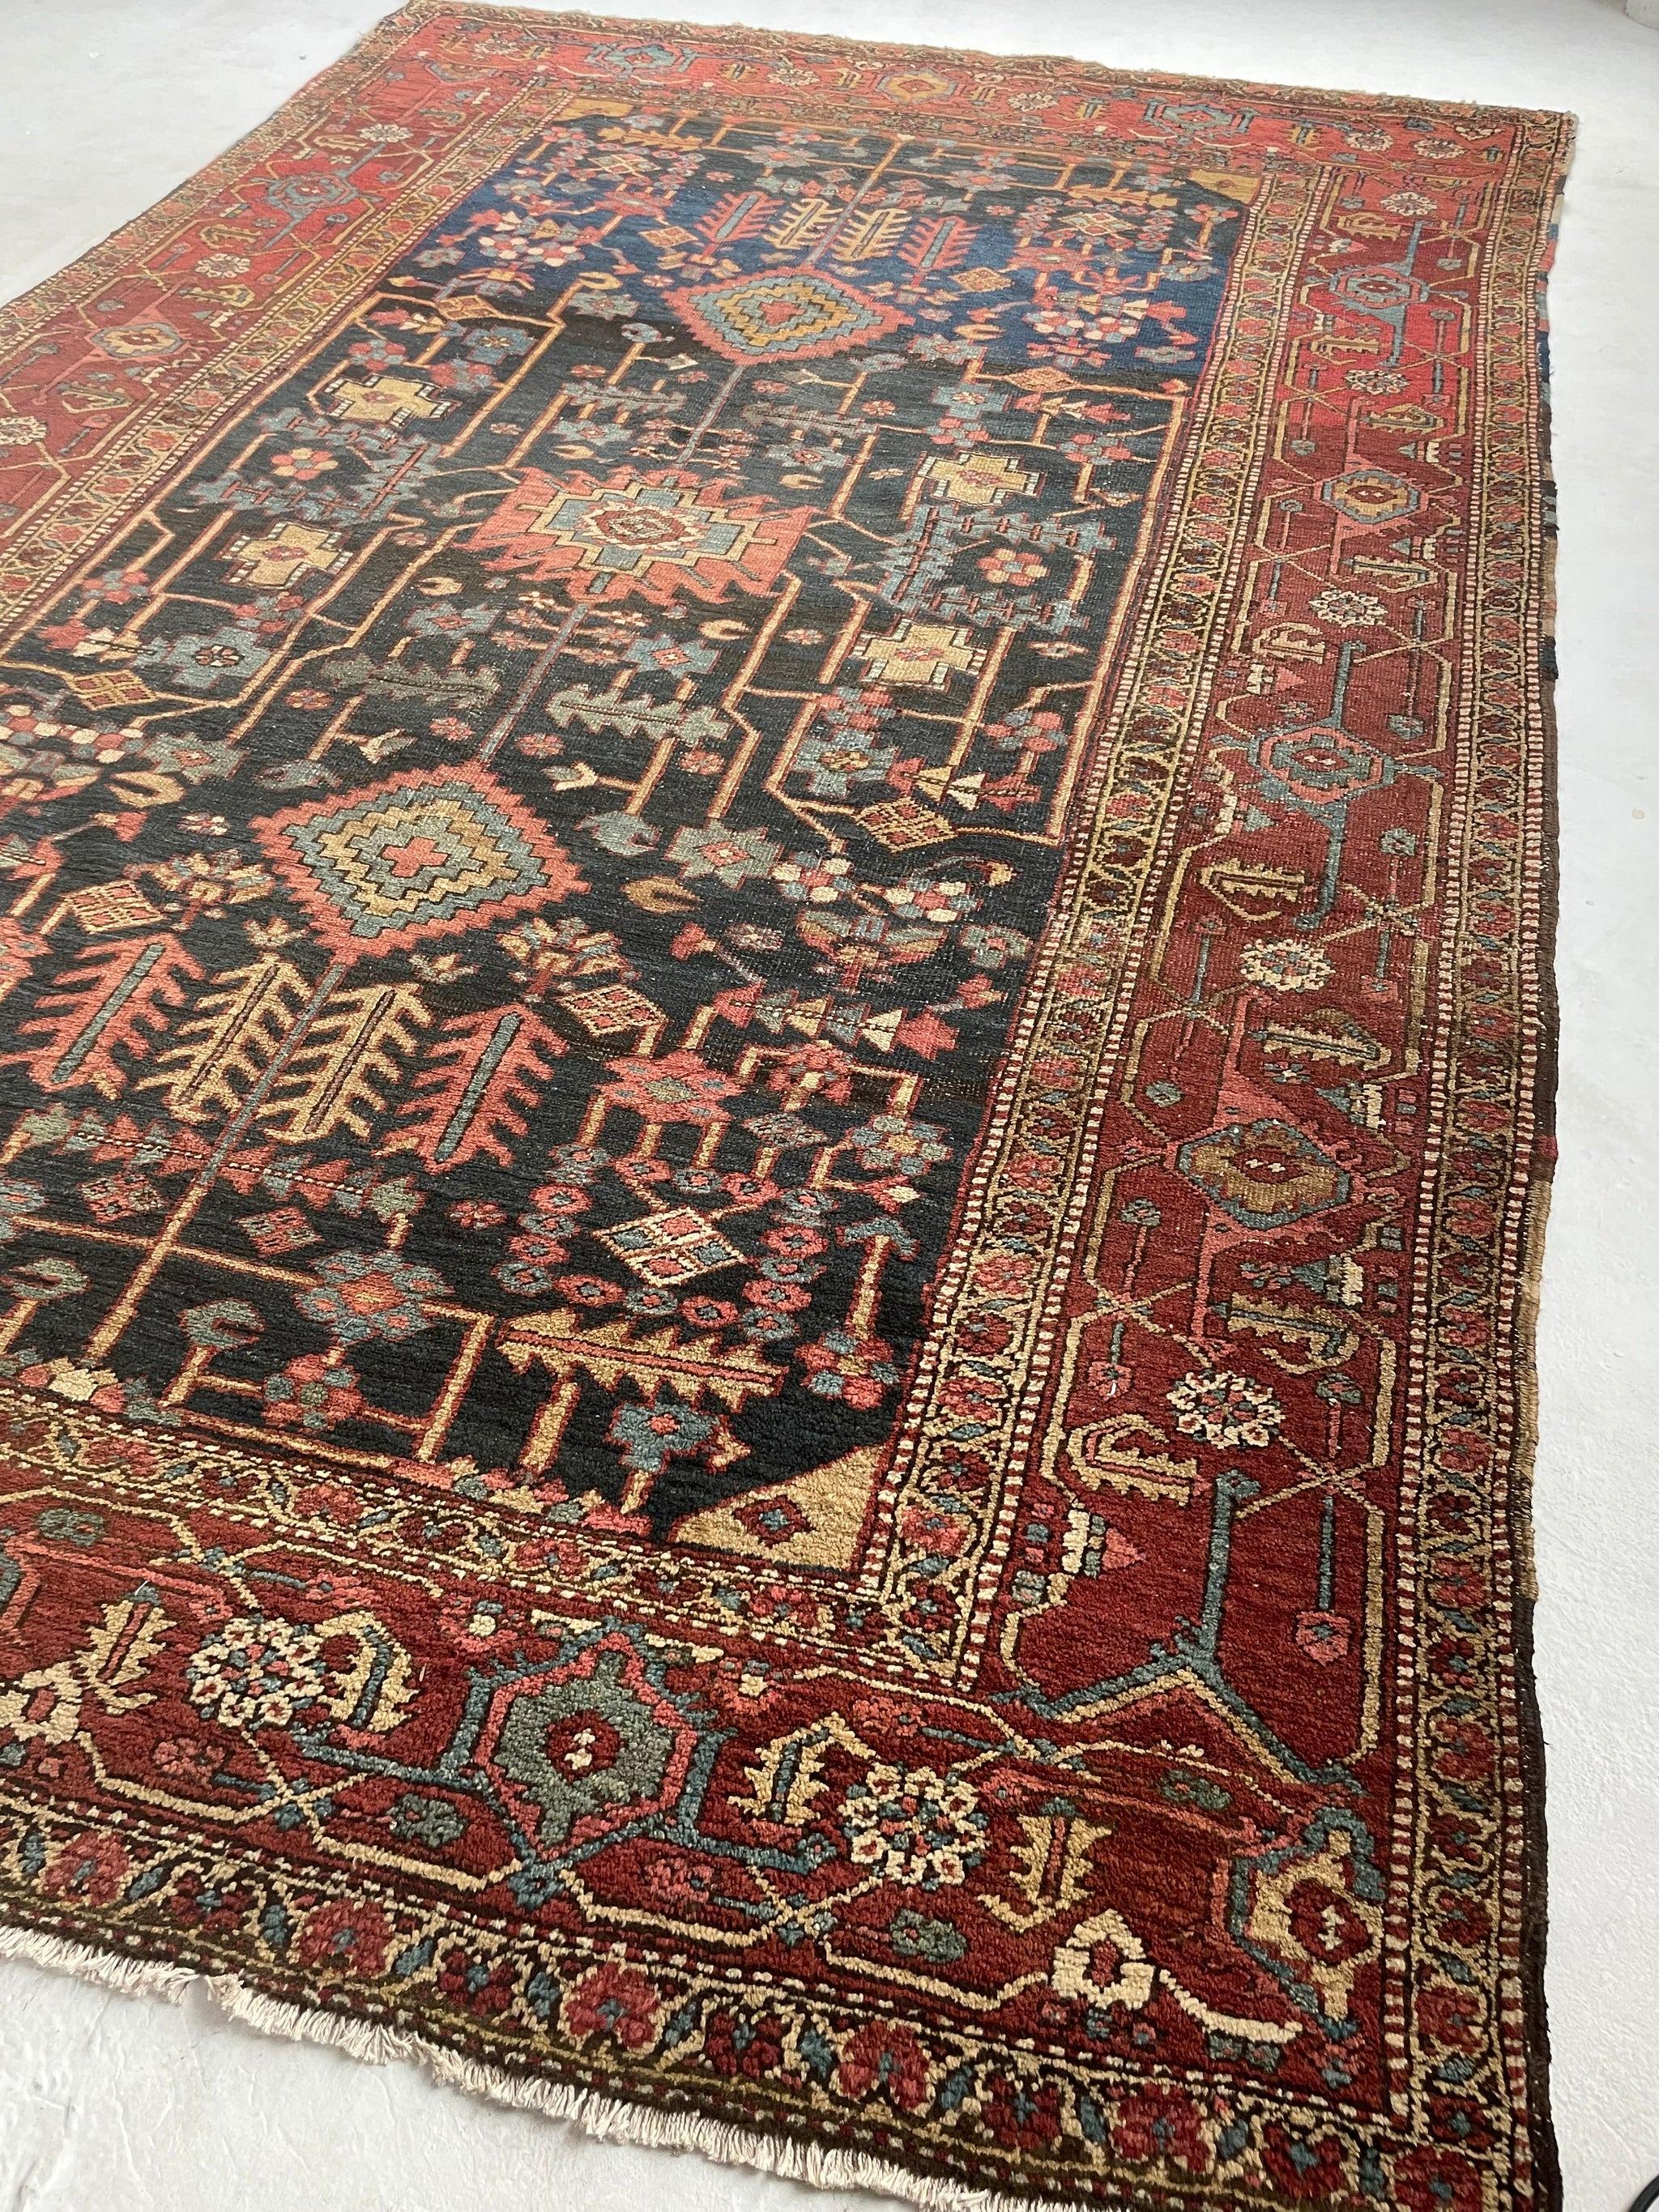 Mint Rare Design with Gorgeous Color Palette  One-of-One Antique Persian Heriz

About: Ask any rug expert you know if they've EVER seen anything like this! This is a completely different SPECIES.  Deepest Indigo with large bands of Dark Oxford Blue